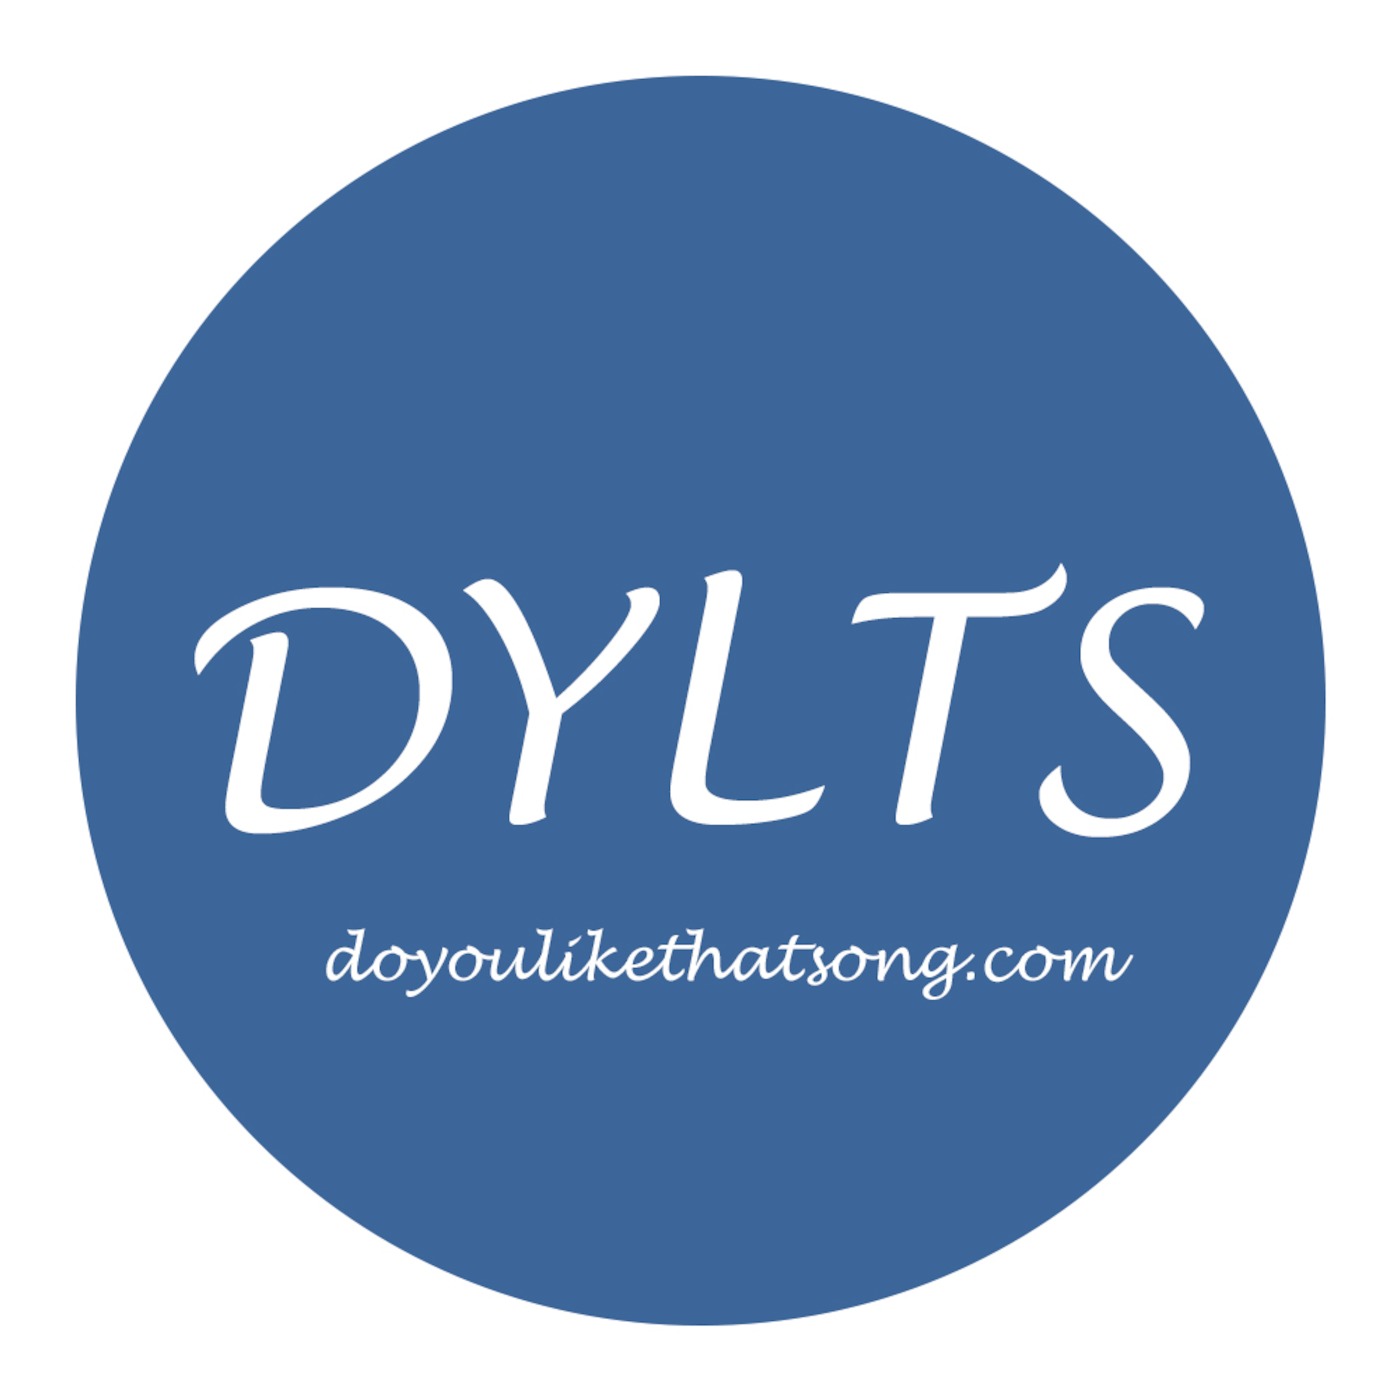 DYLTS' Podcast